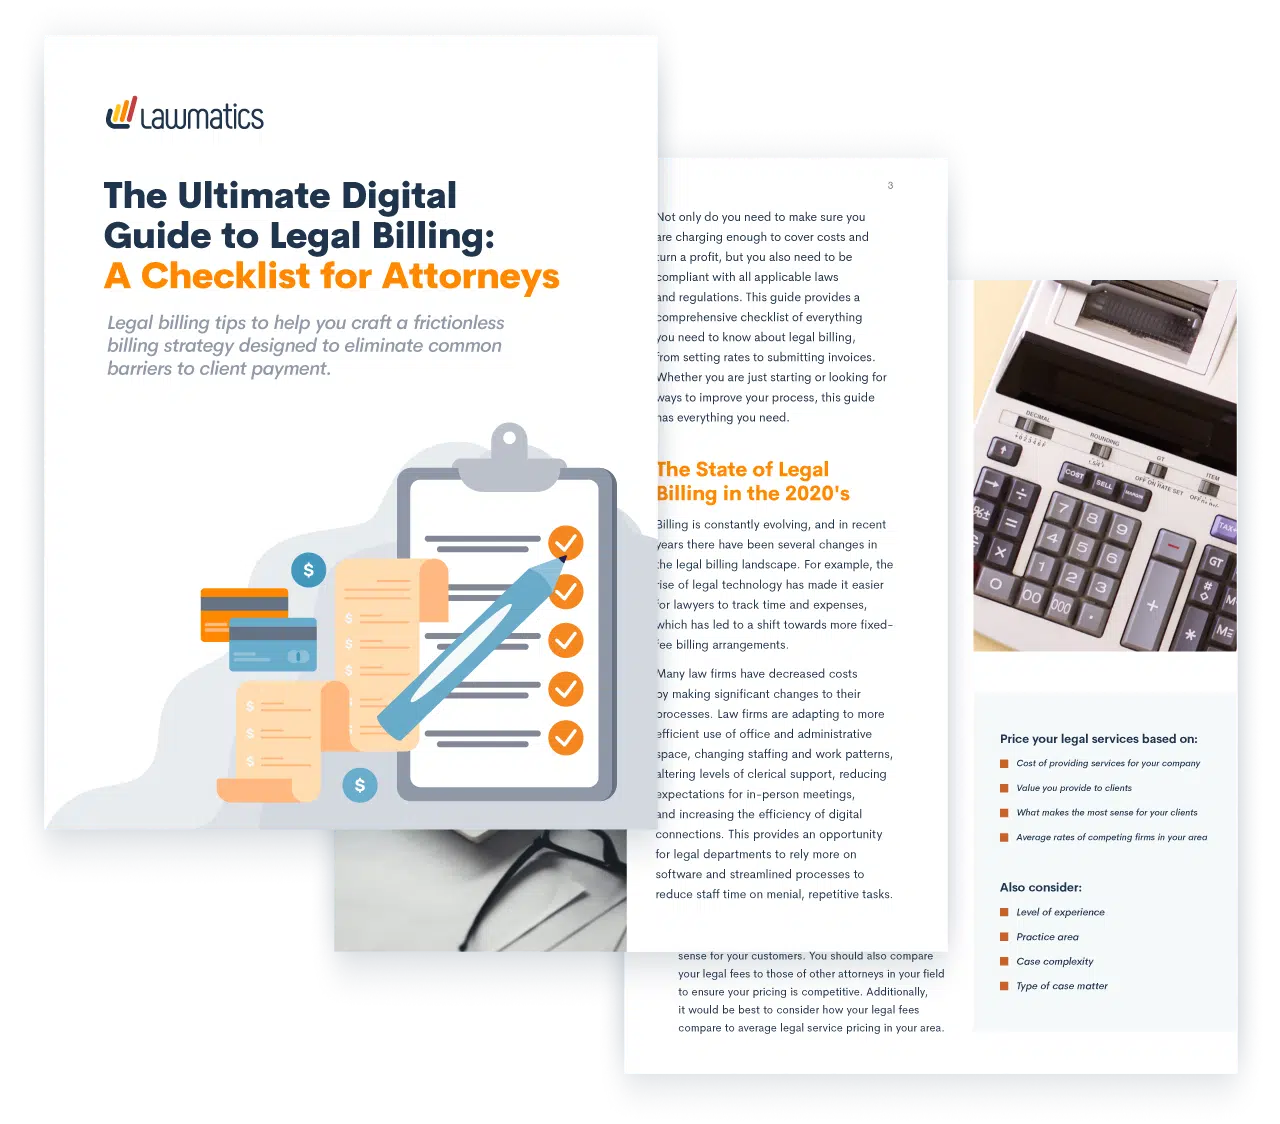 The Ultimate Digital Guide to Legal Billing